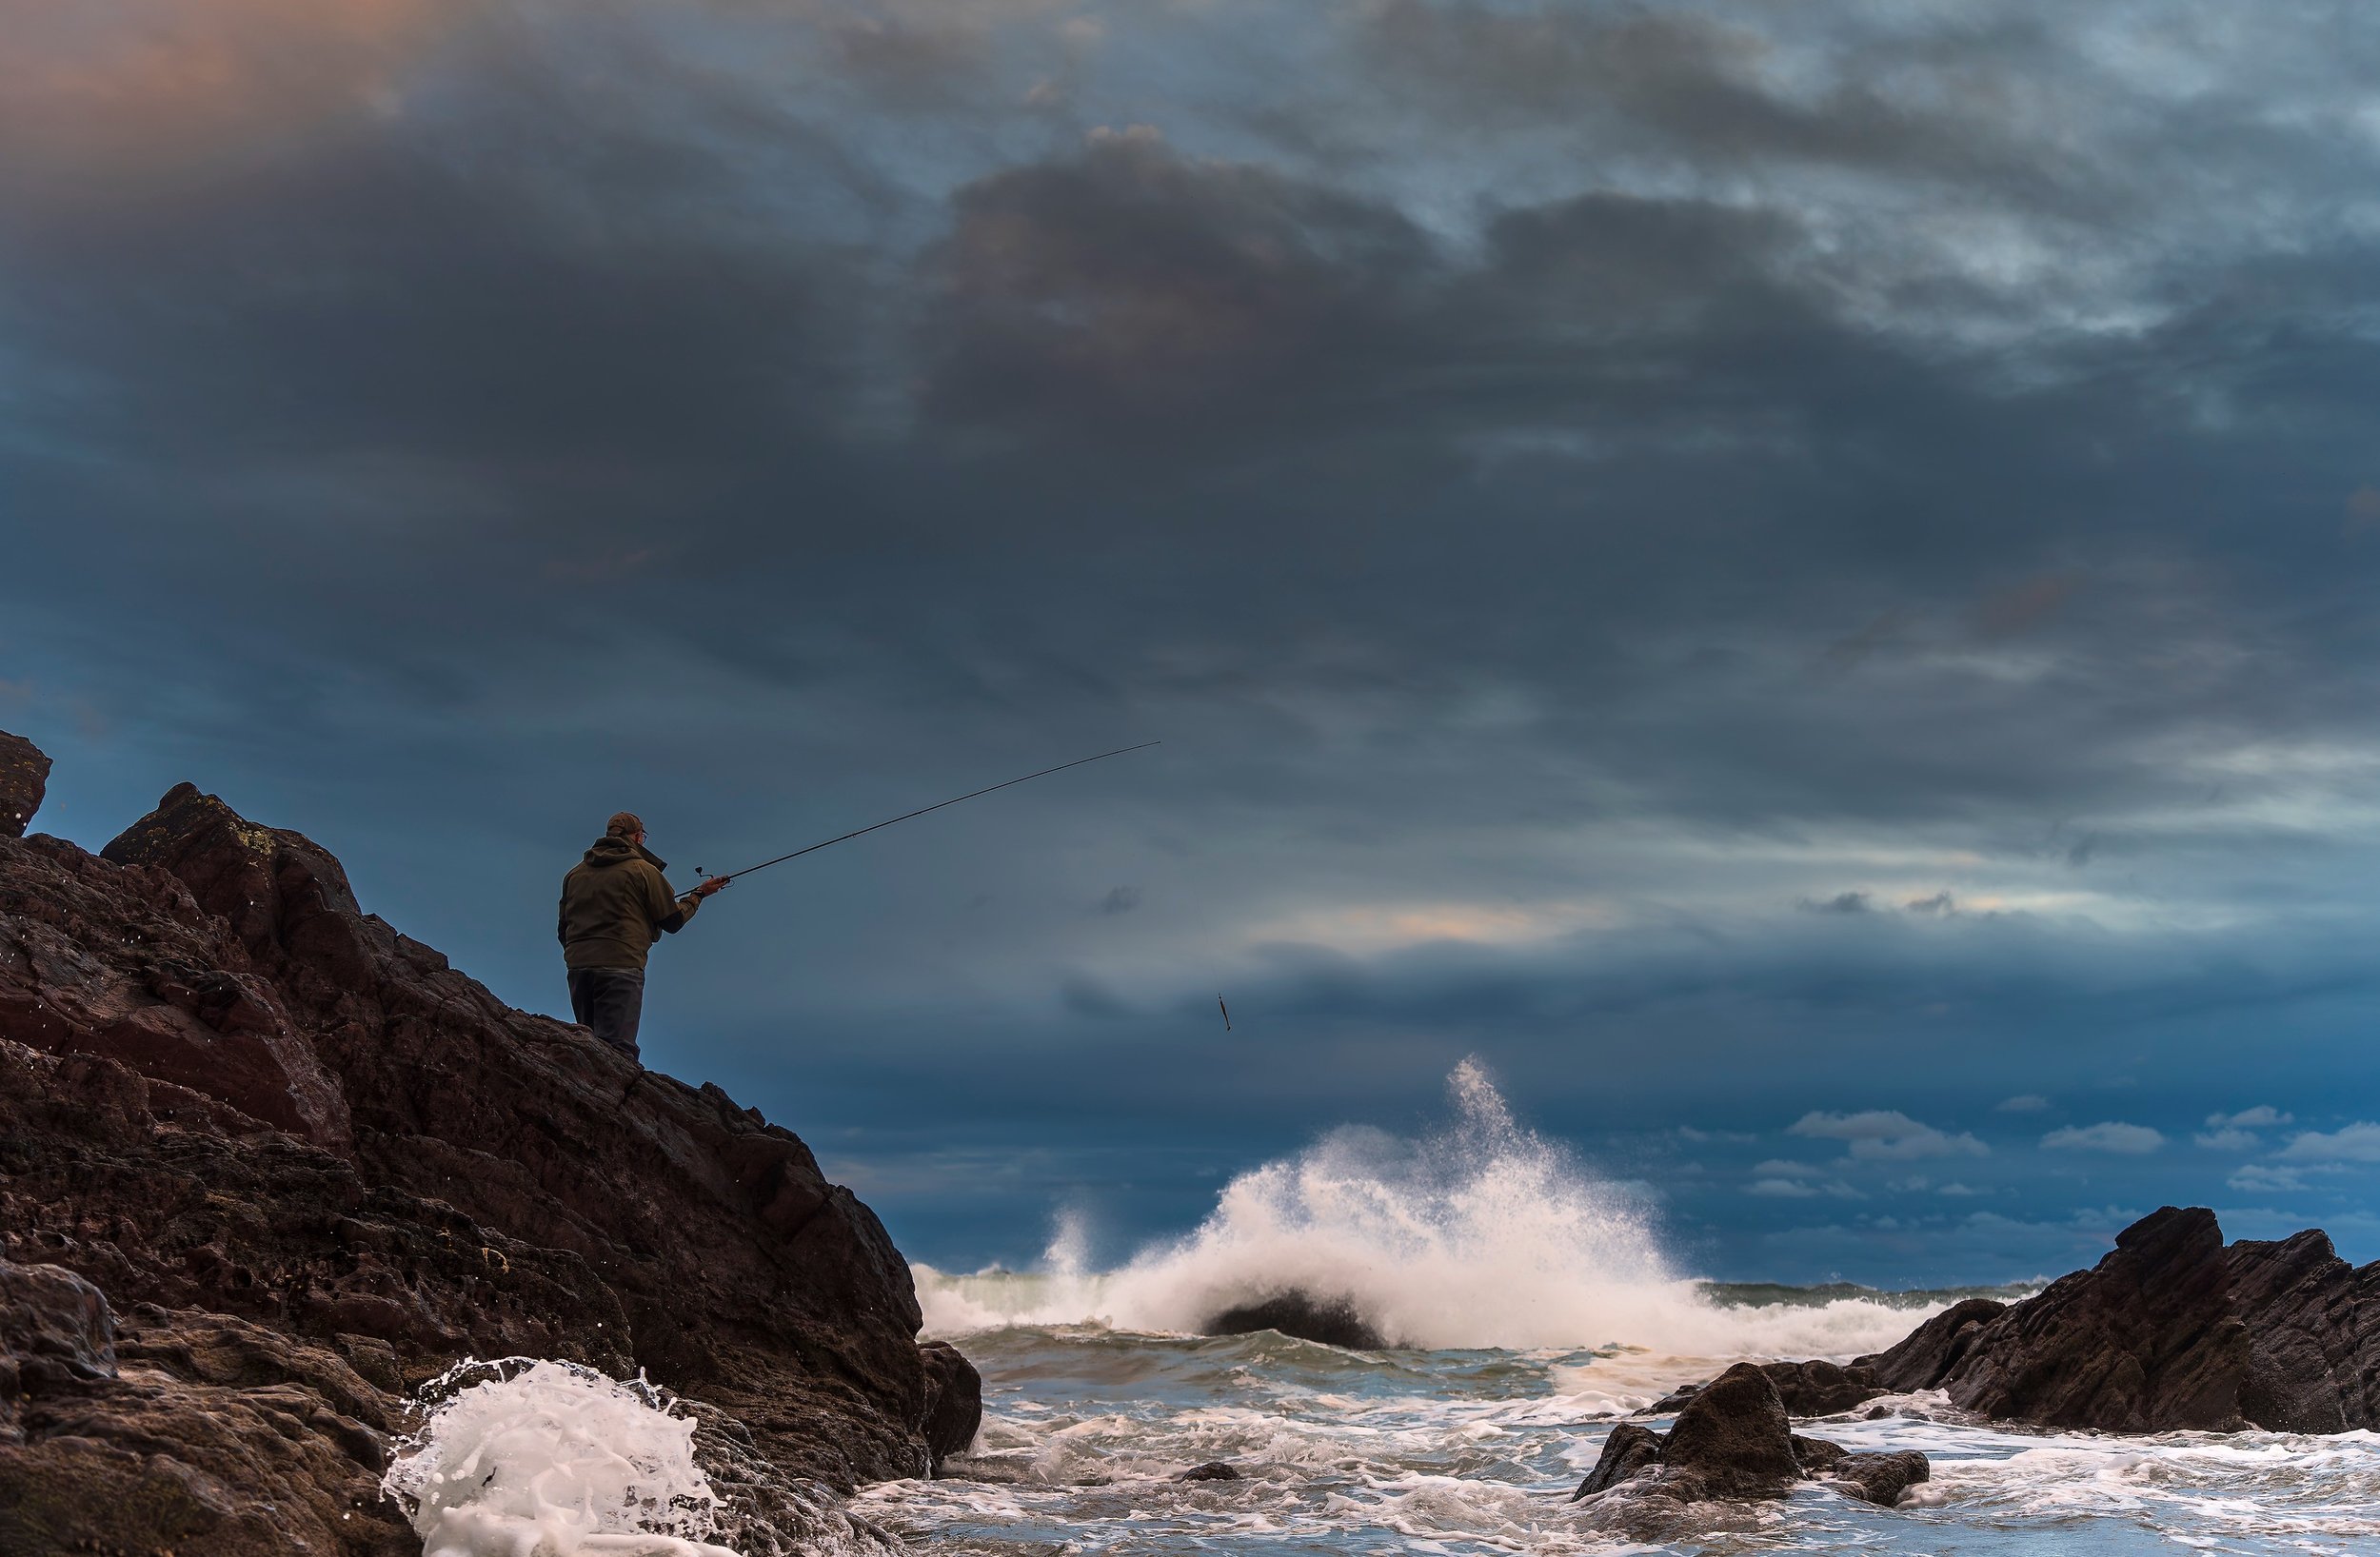 Catching bass between the biggest lines of swell rolling in — Henry Gilbey